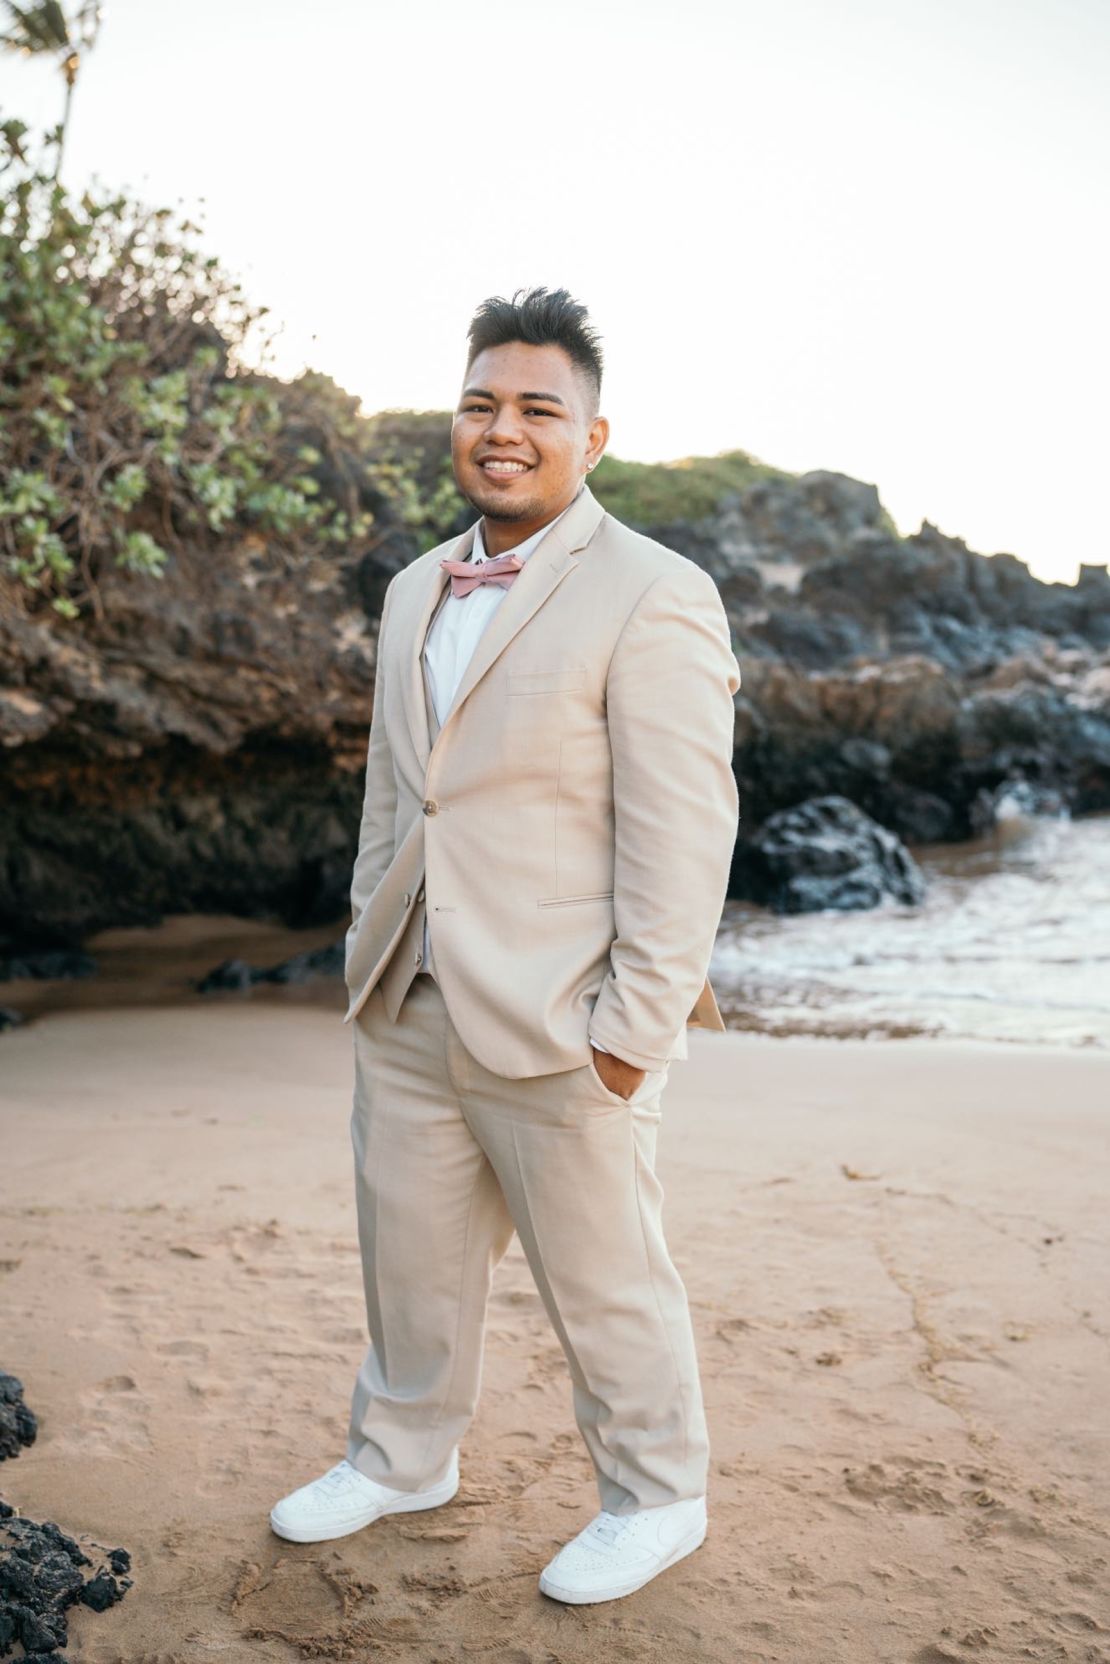 Bryan Aguiran poses on a beach in Lahaina before the wildfire tore apart his community.